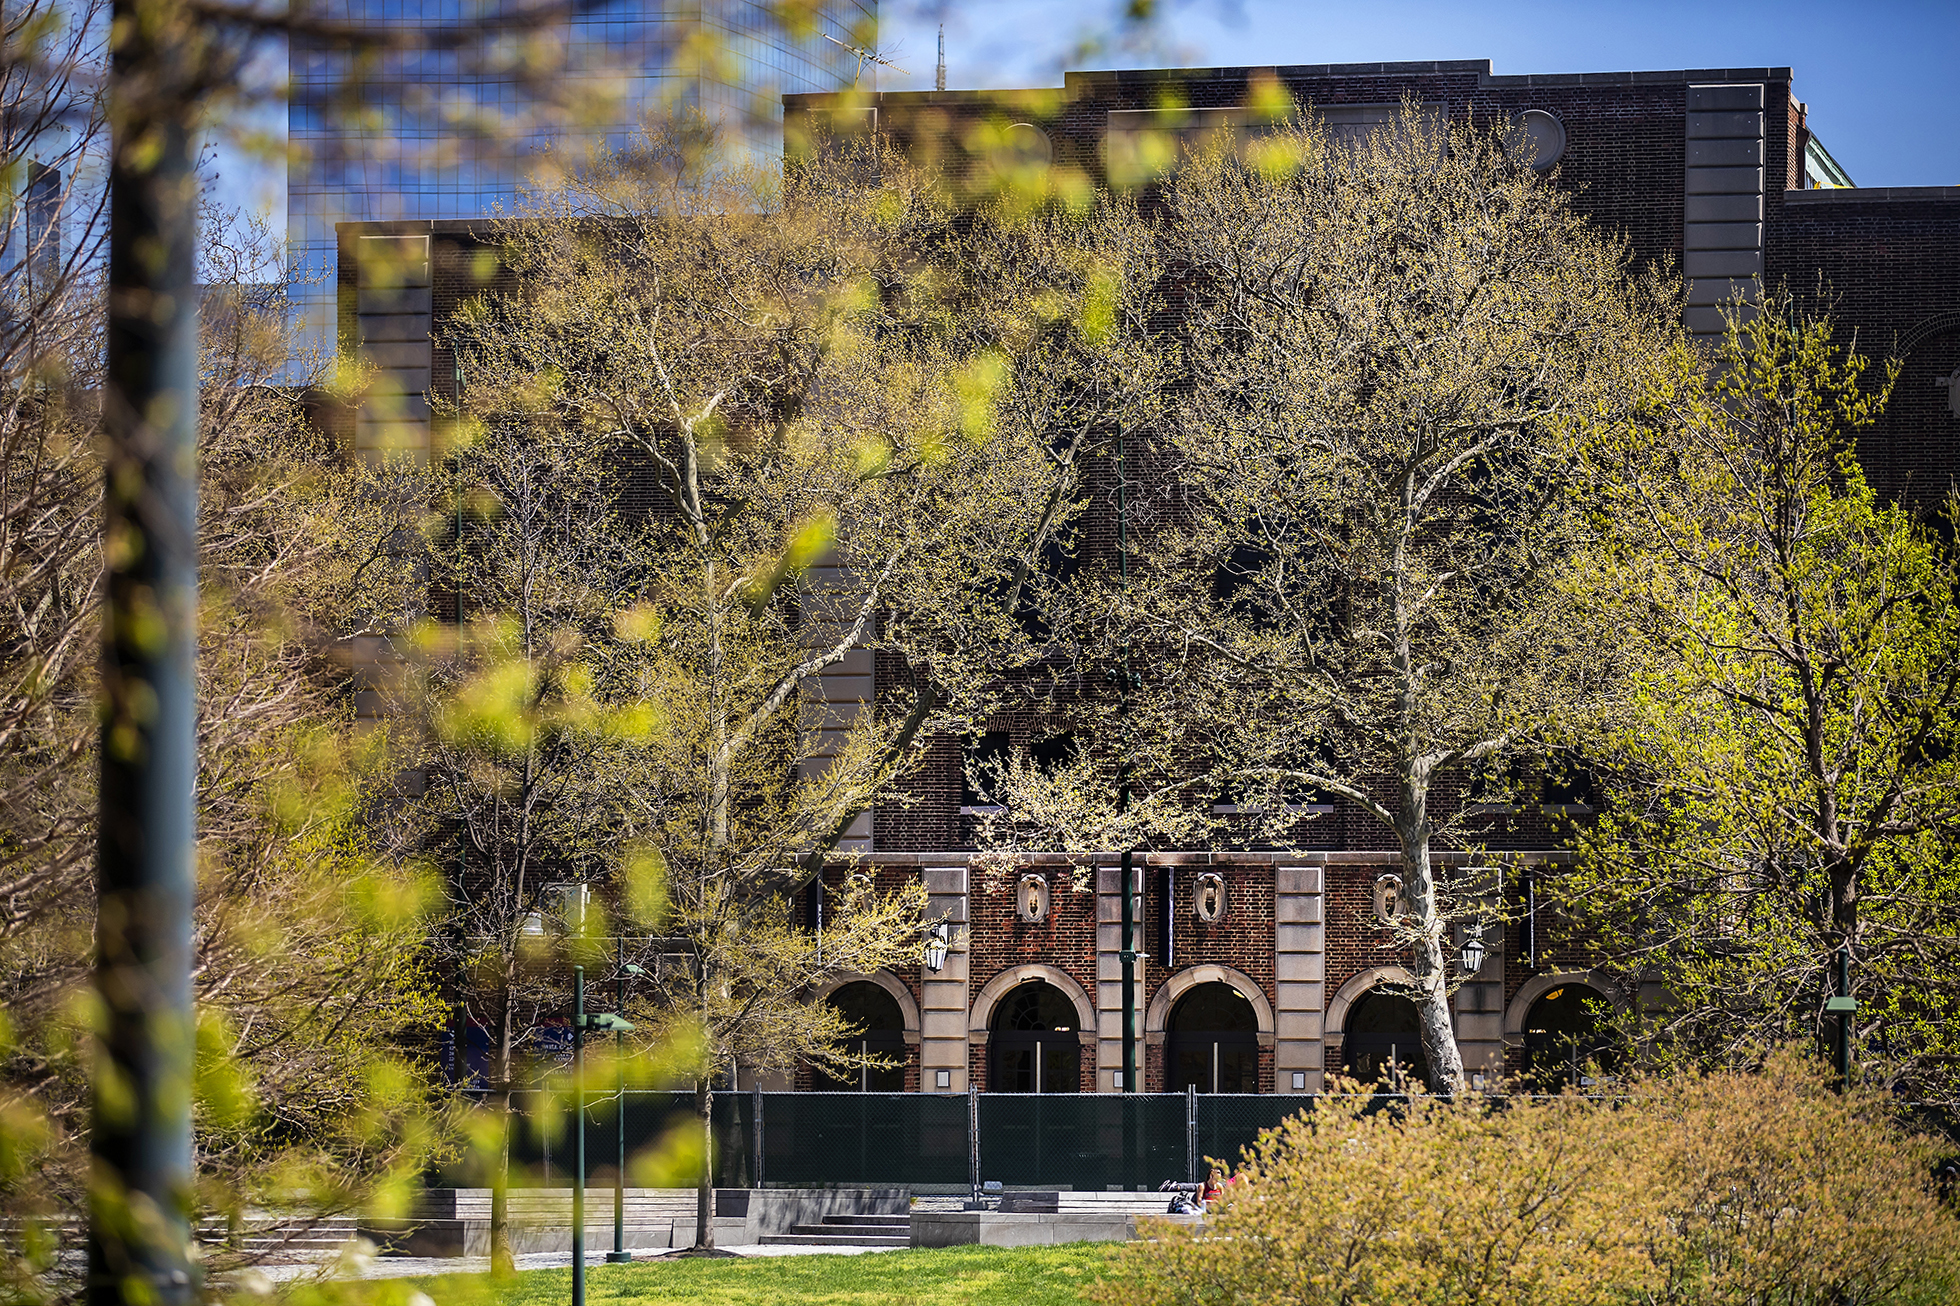 londonplane trees in front of the palestra